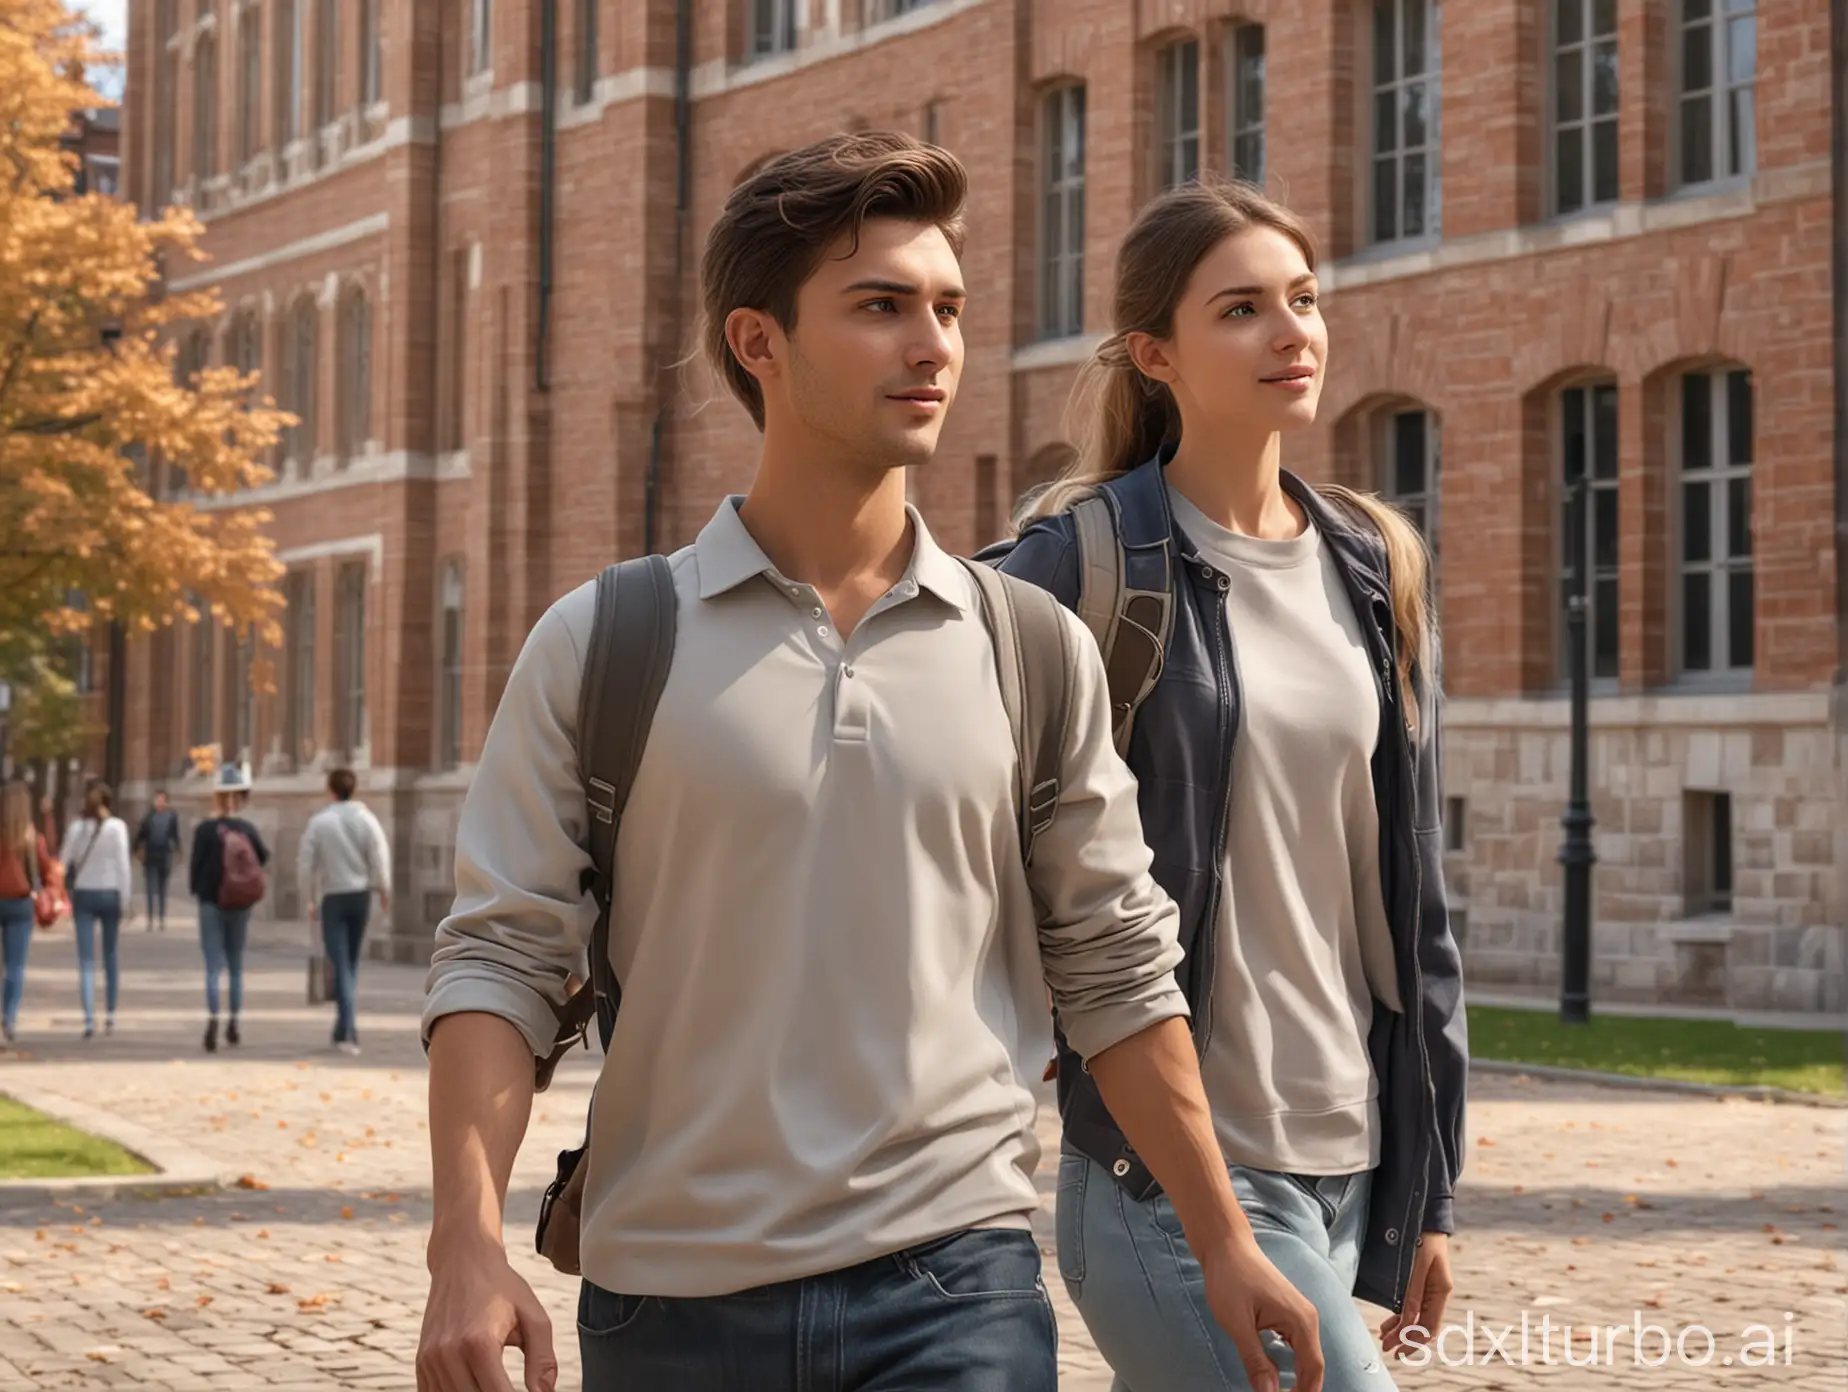 A male is walking in front, with a female behind tapping his shoulder, university campus, 3D image